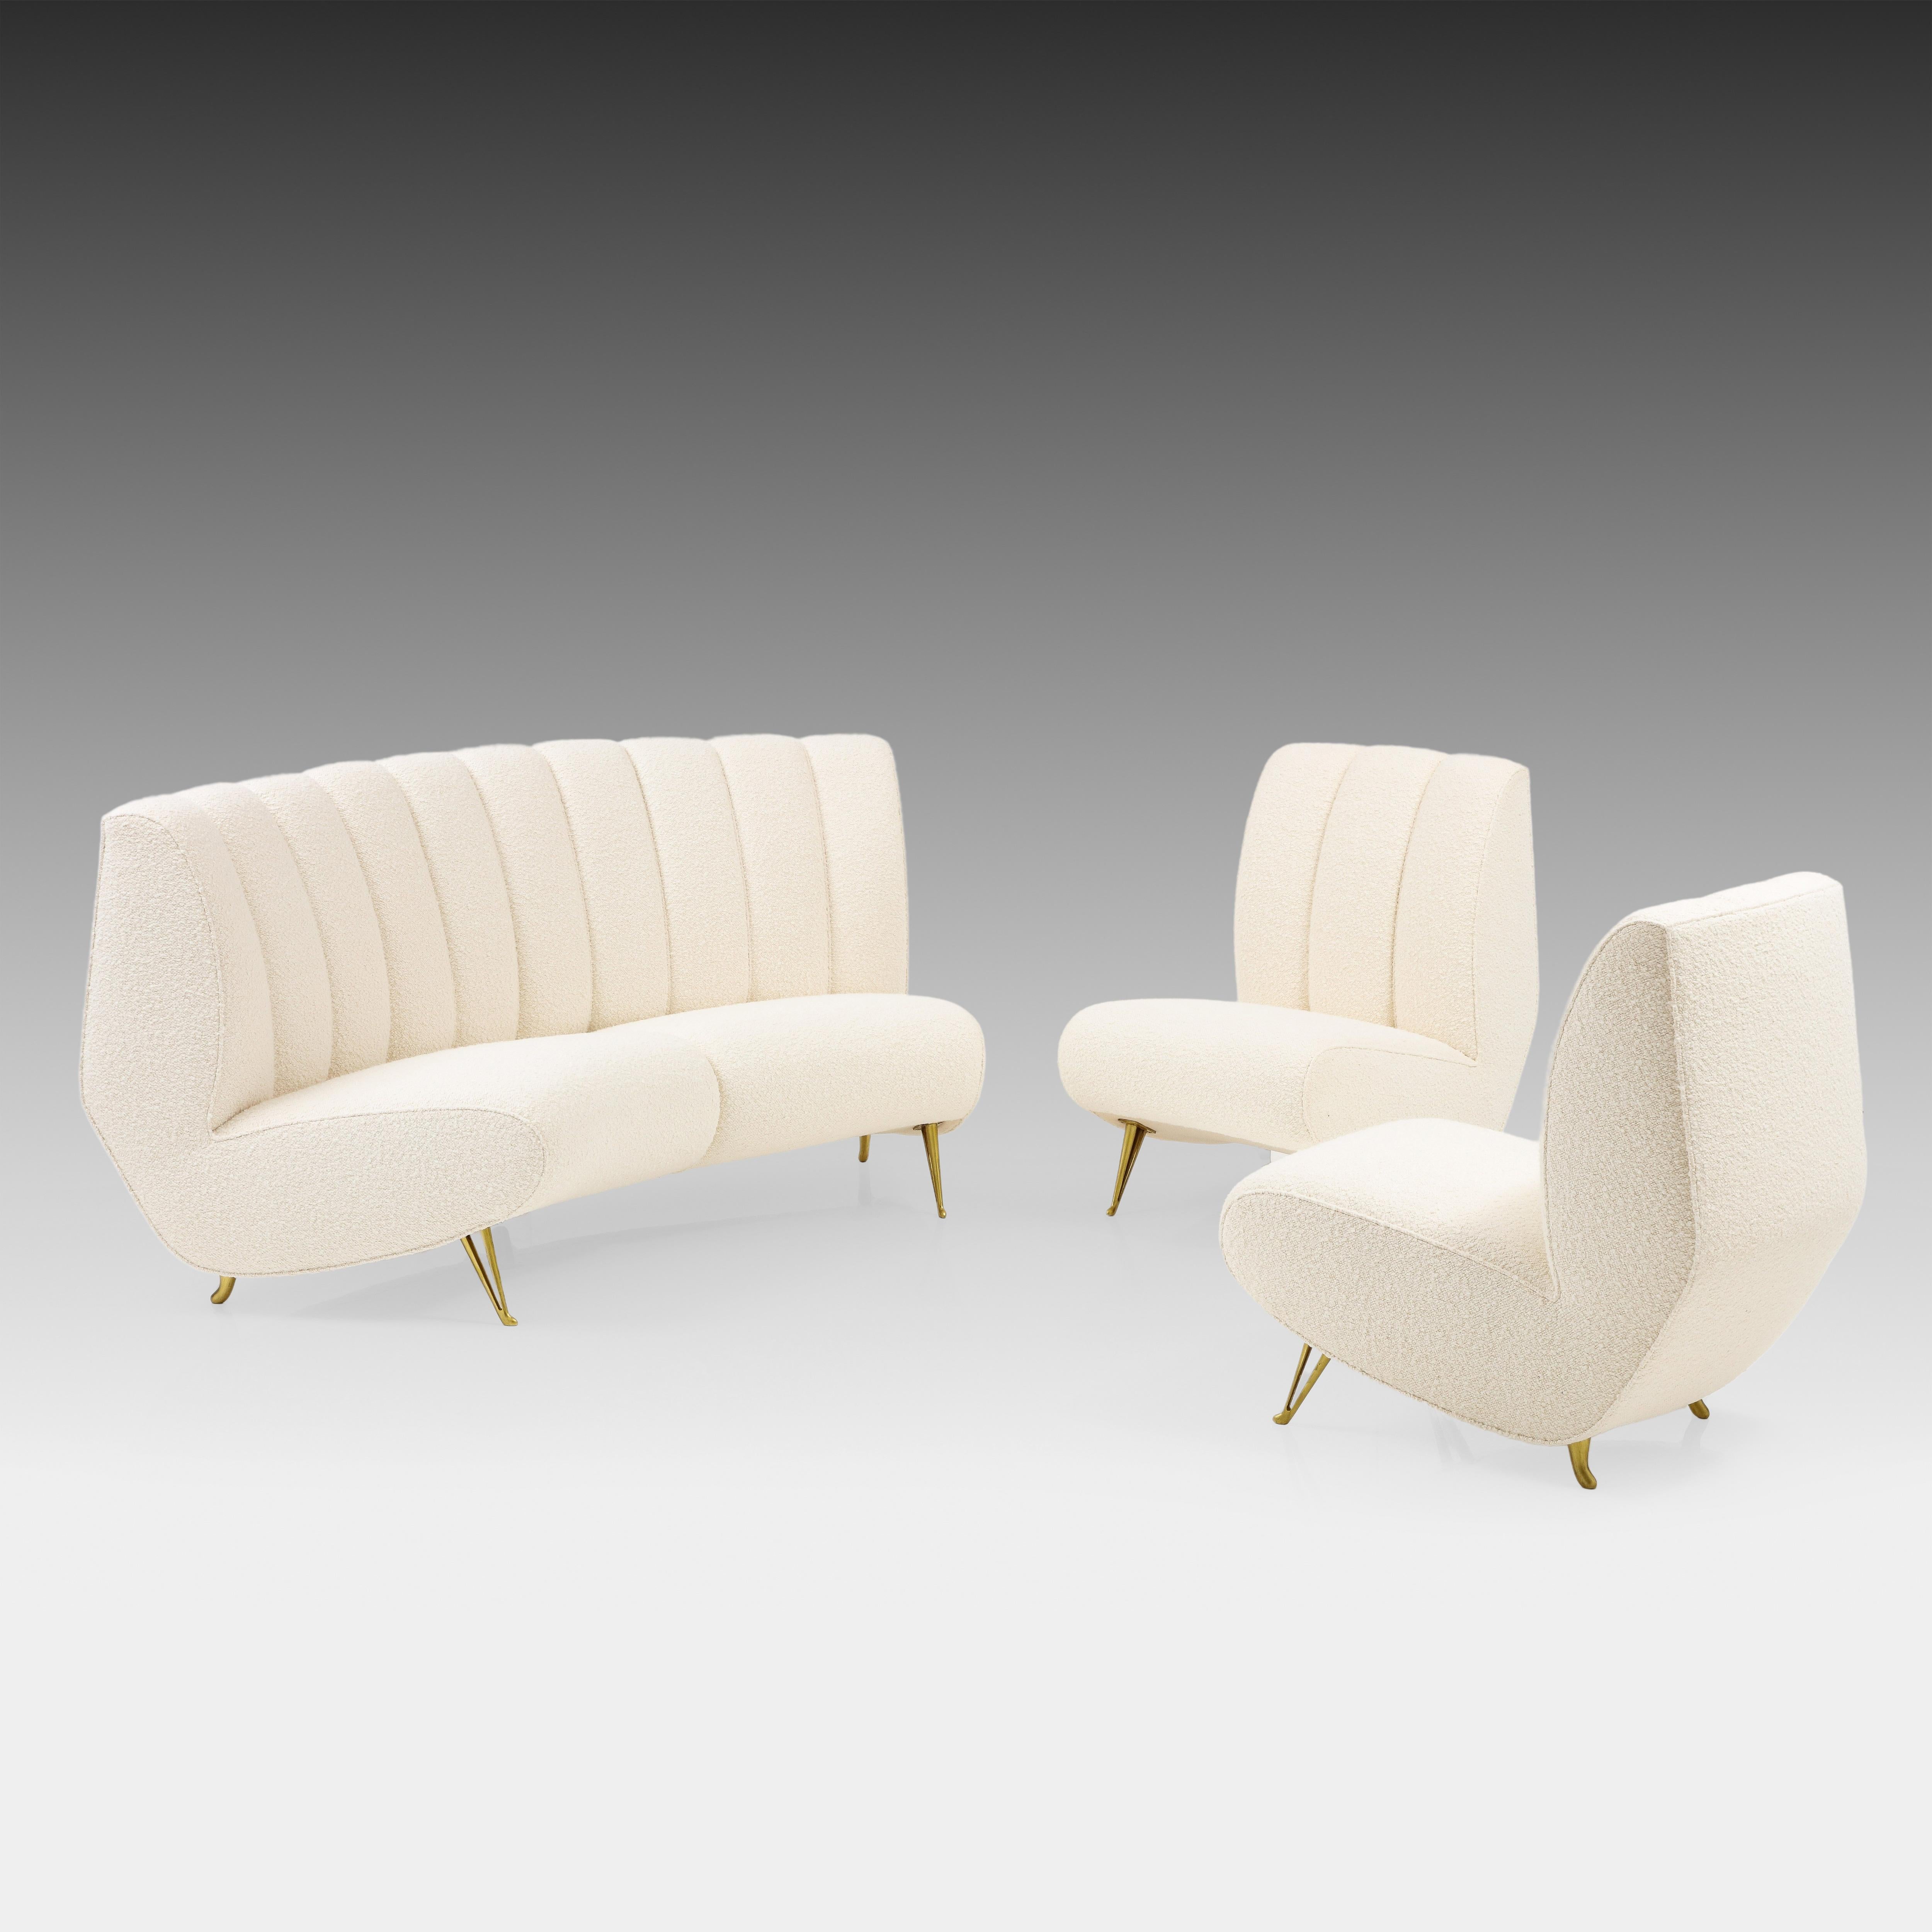 ISA Bergamo Rare Curved Settee in Ivory Bouclé, Italy, 1950s For Sale 7